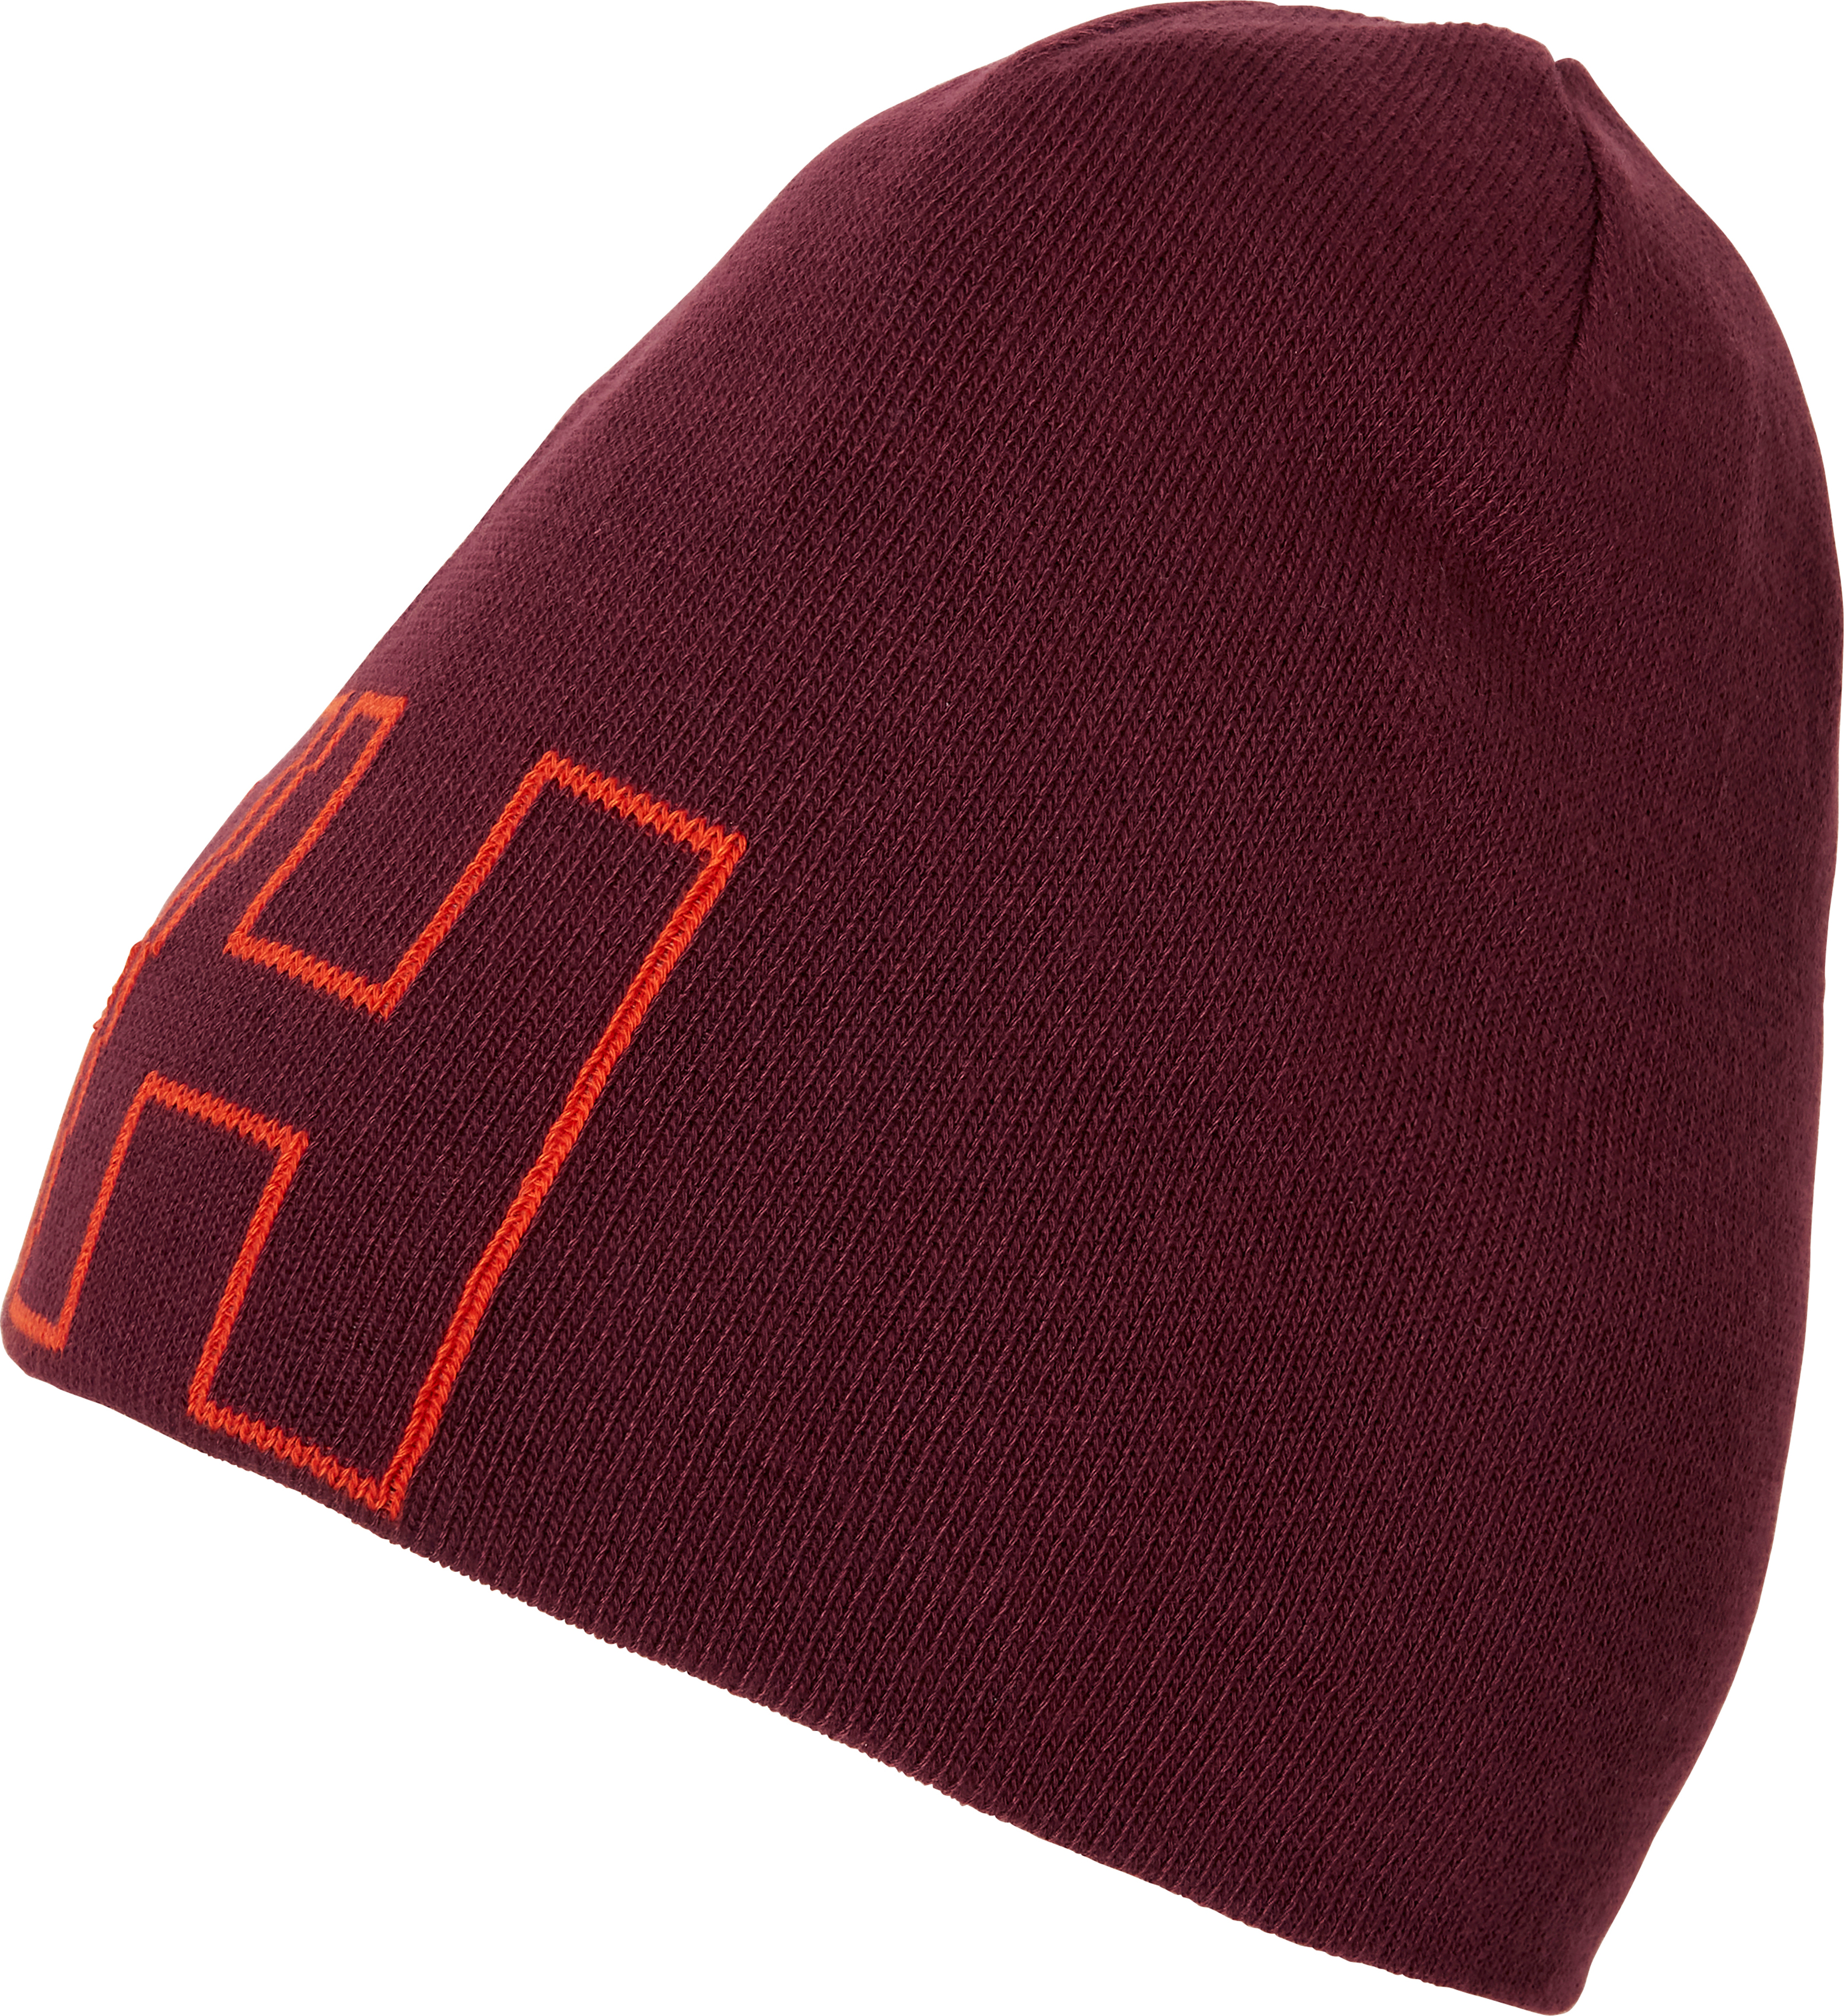 Helly Hansen Outline Beanie Hickory OneSize, Hickory